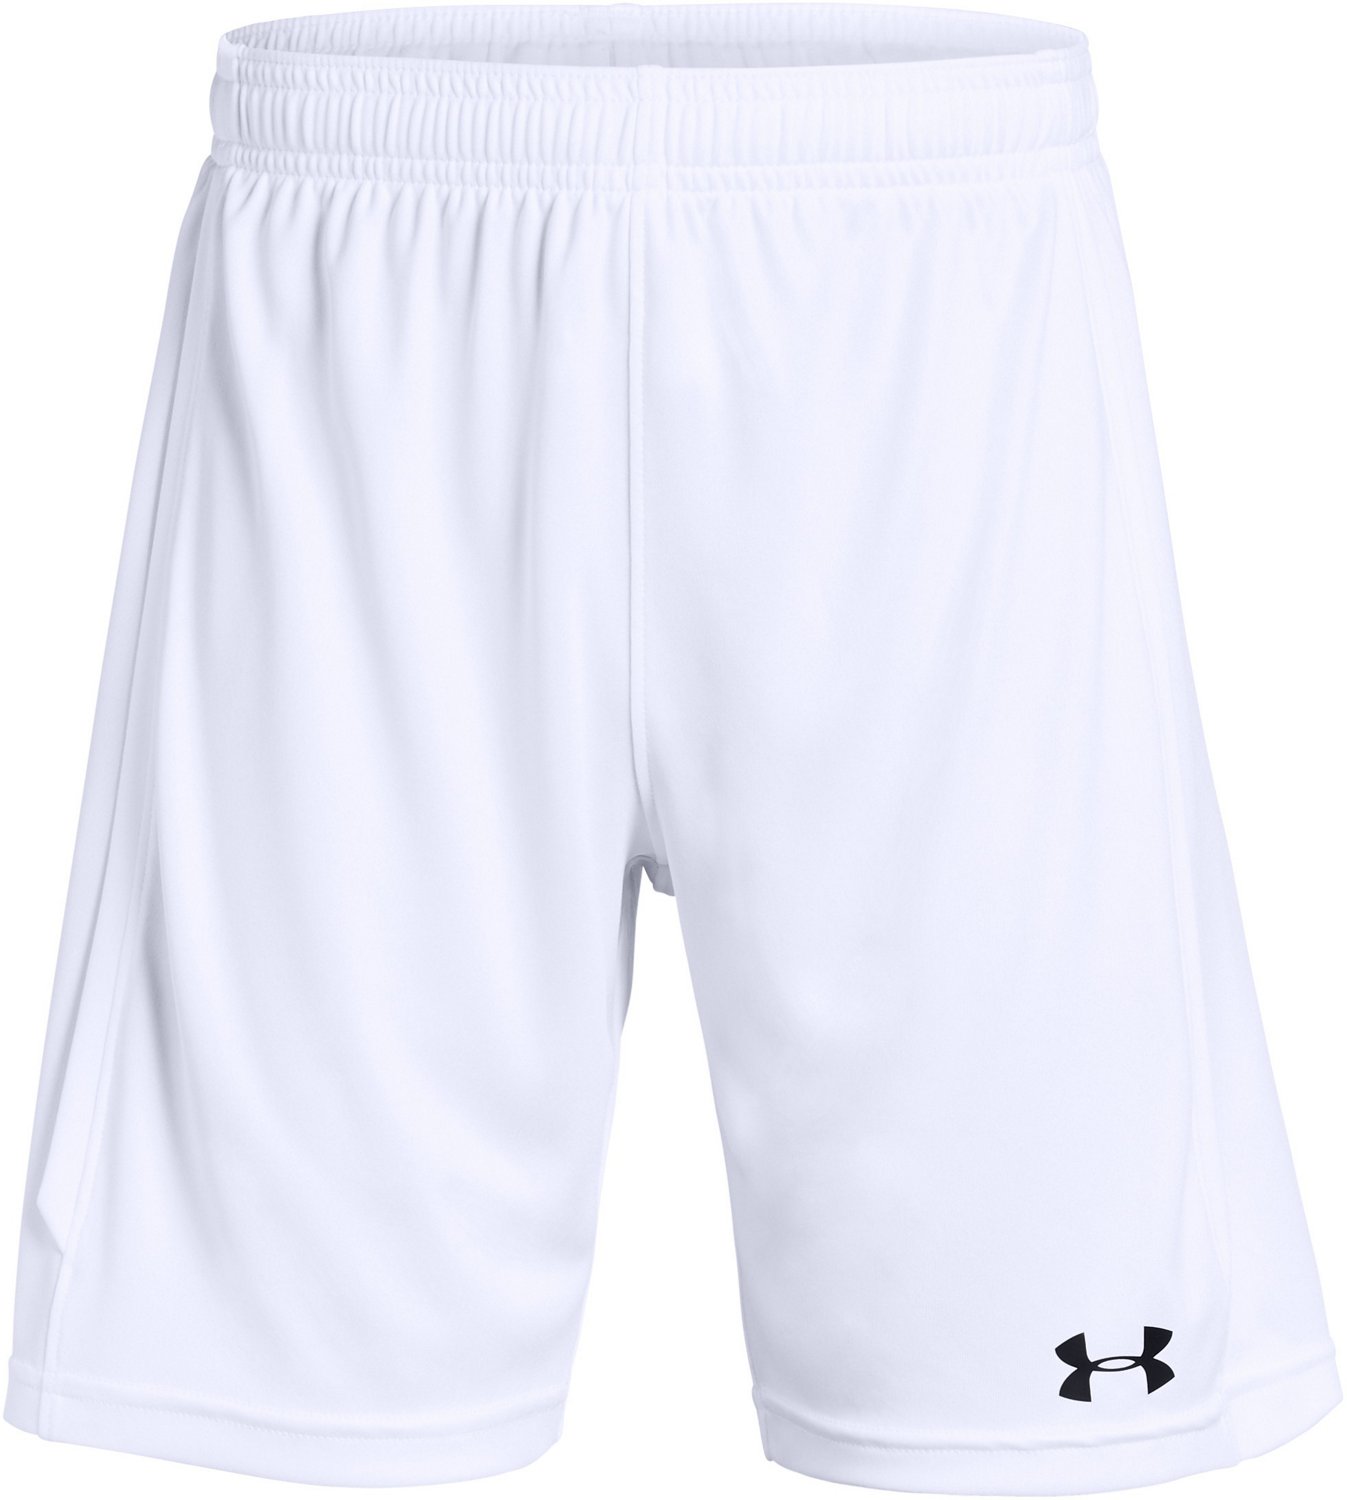 Under Armour Boys' Maquina 2.0 Shorts | Free Shipping at Academy